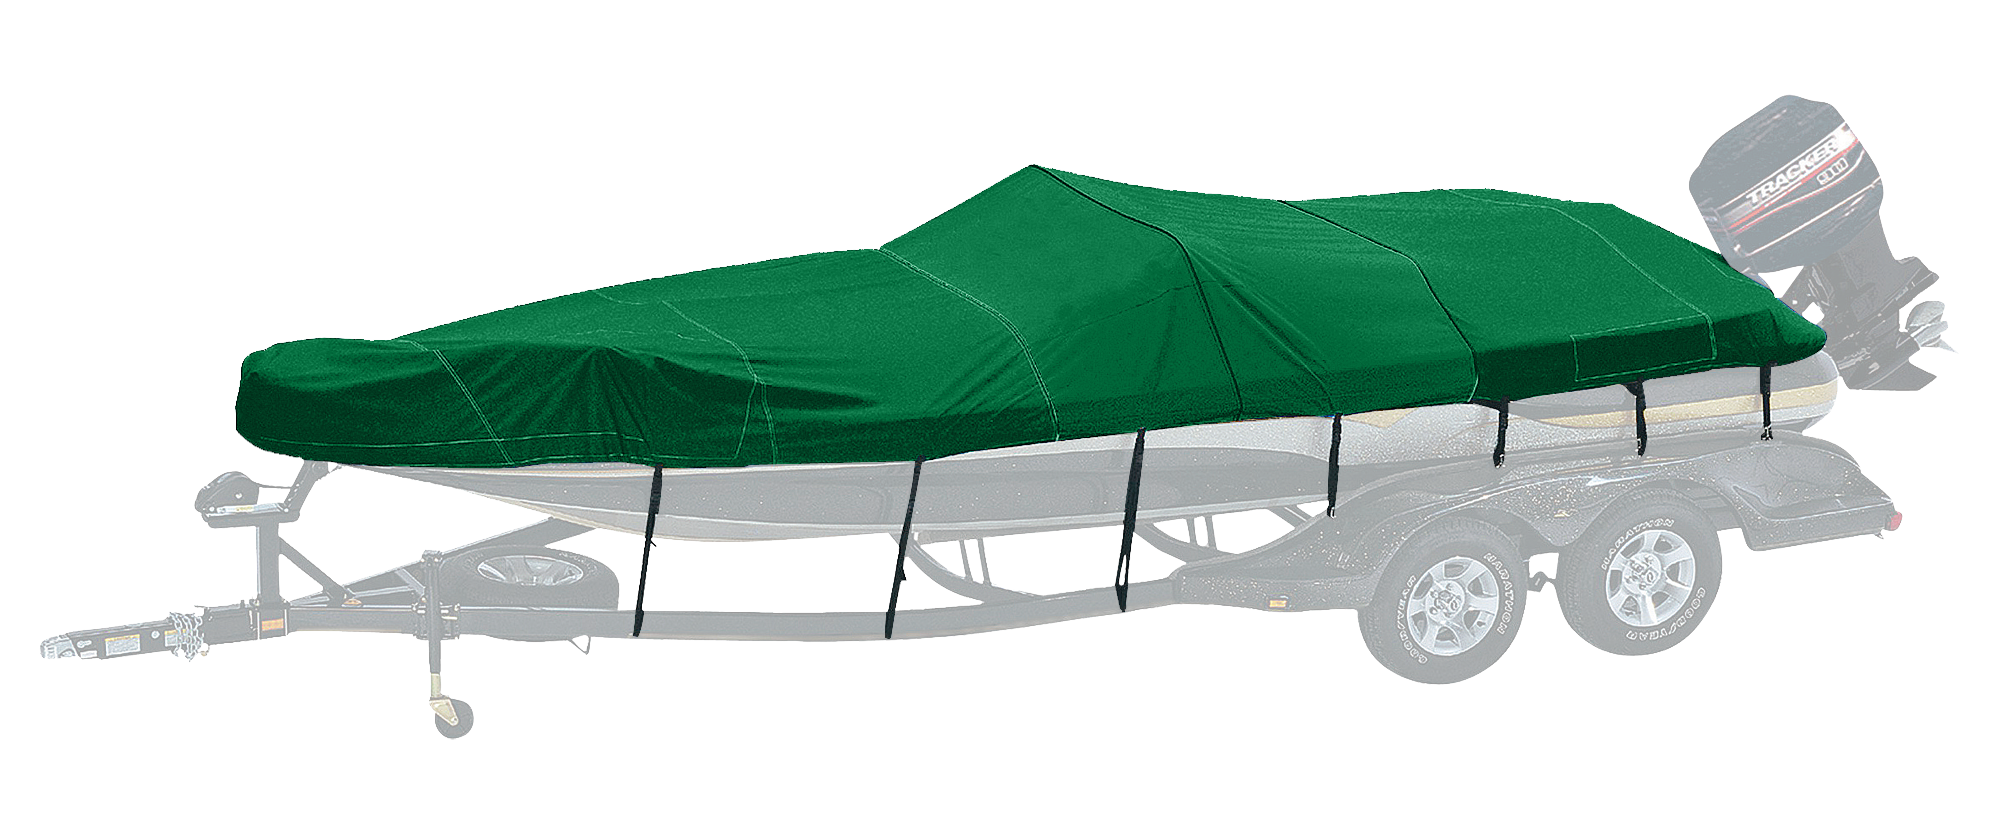 Bass Pro Shops Exact Fit Custom Boat Cover by Westland - Nitro Boats - 2002-2005 NX 911 CDC - Forest Green